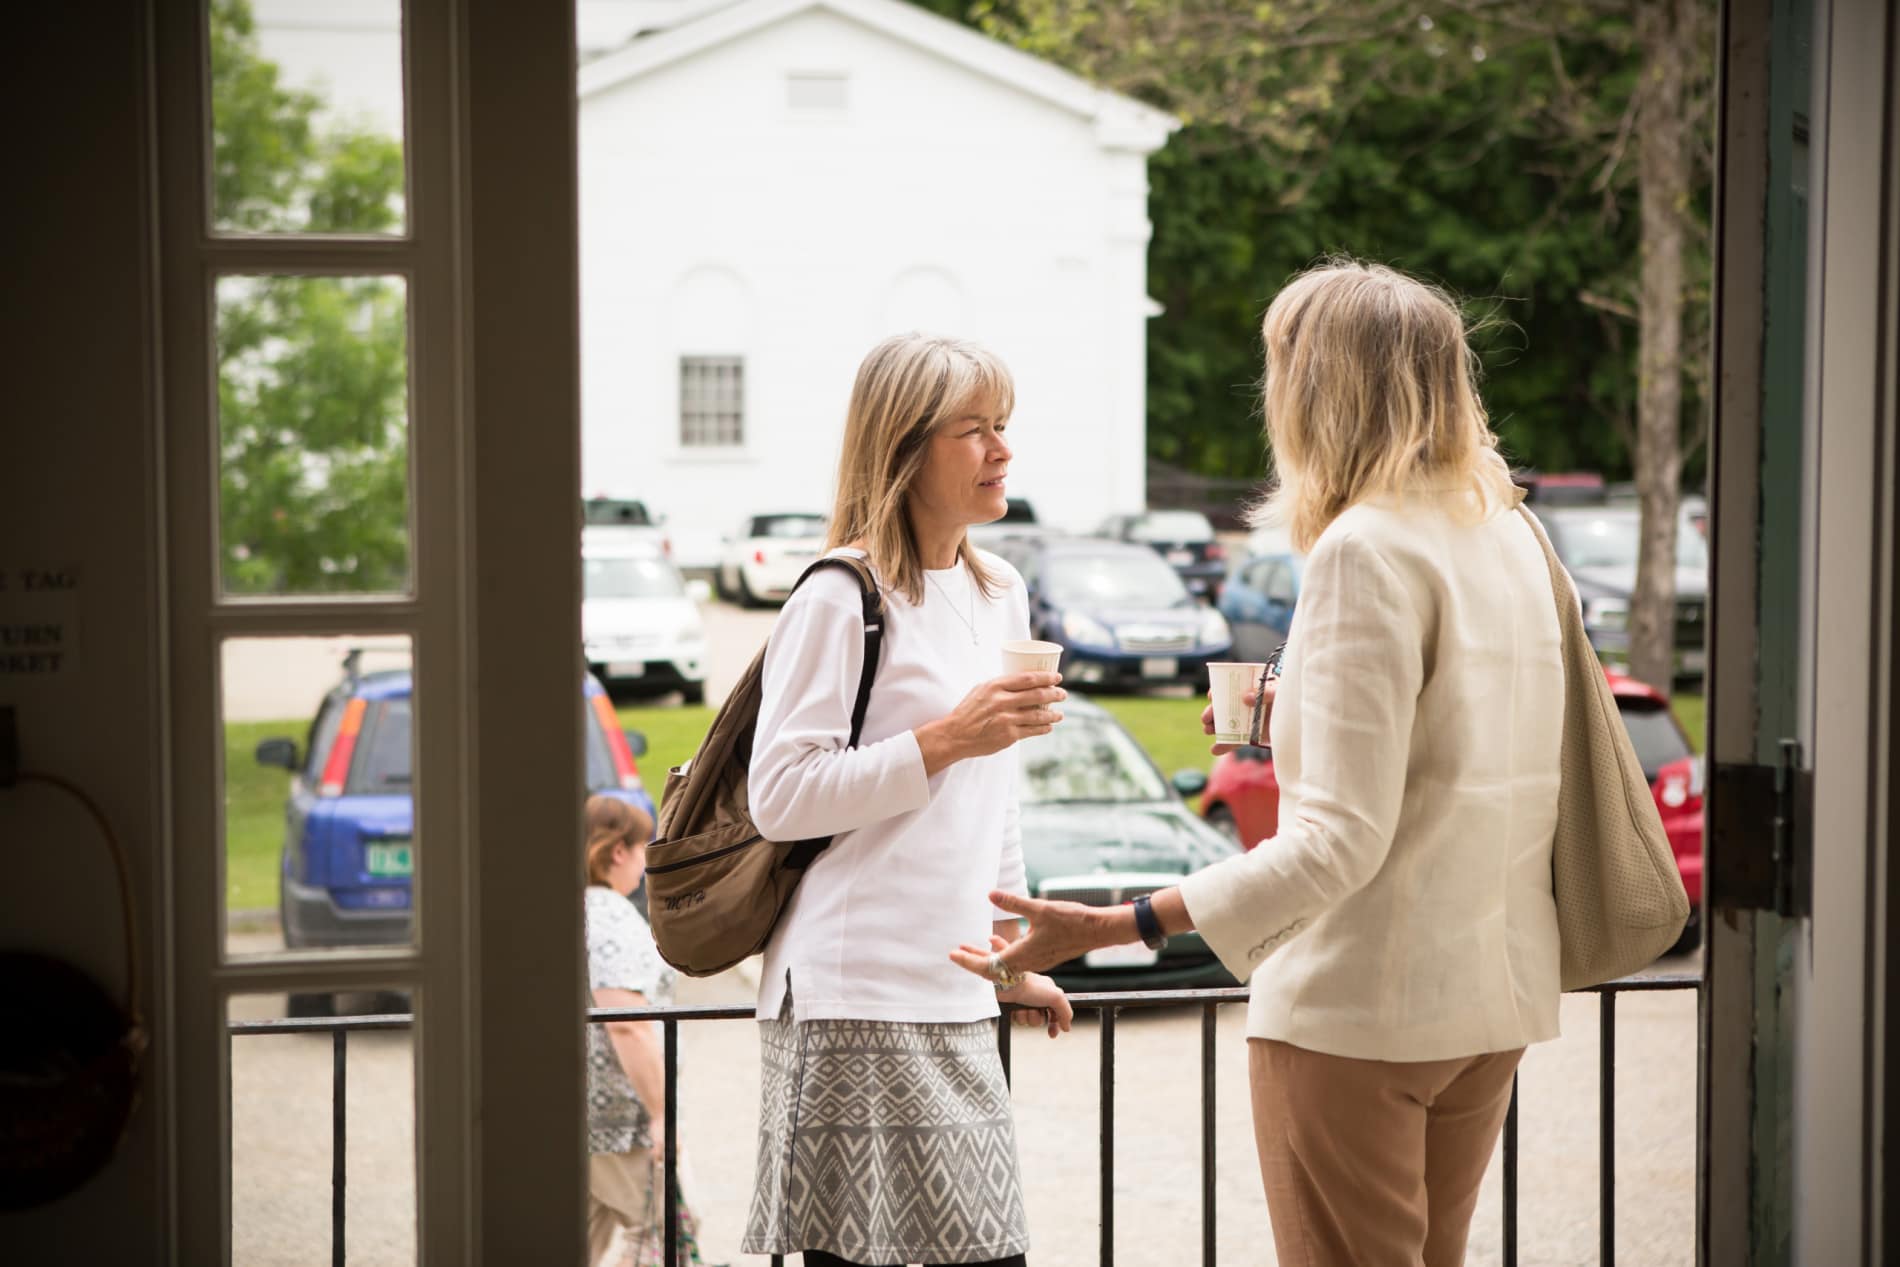 Two women drink coffee and talk at the entrance to the Stockbridge Congregational Church